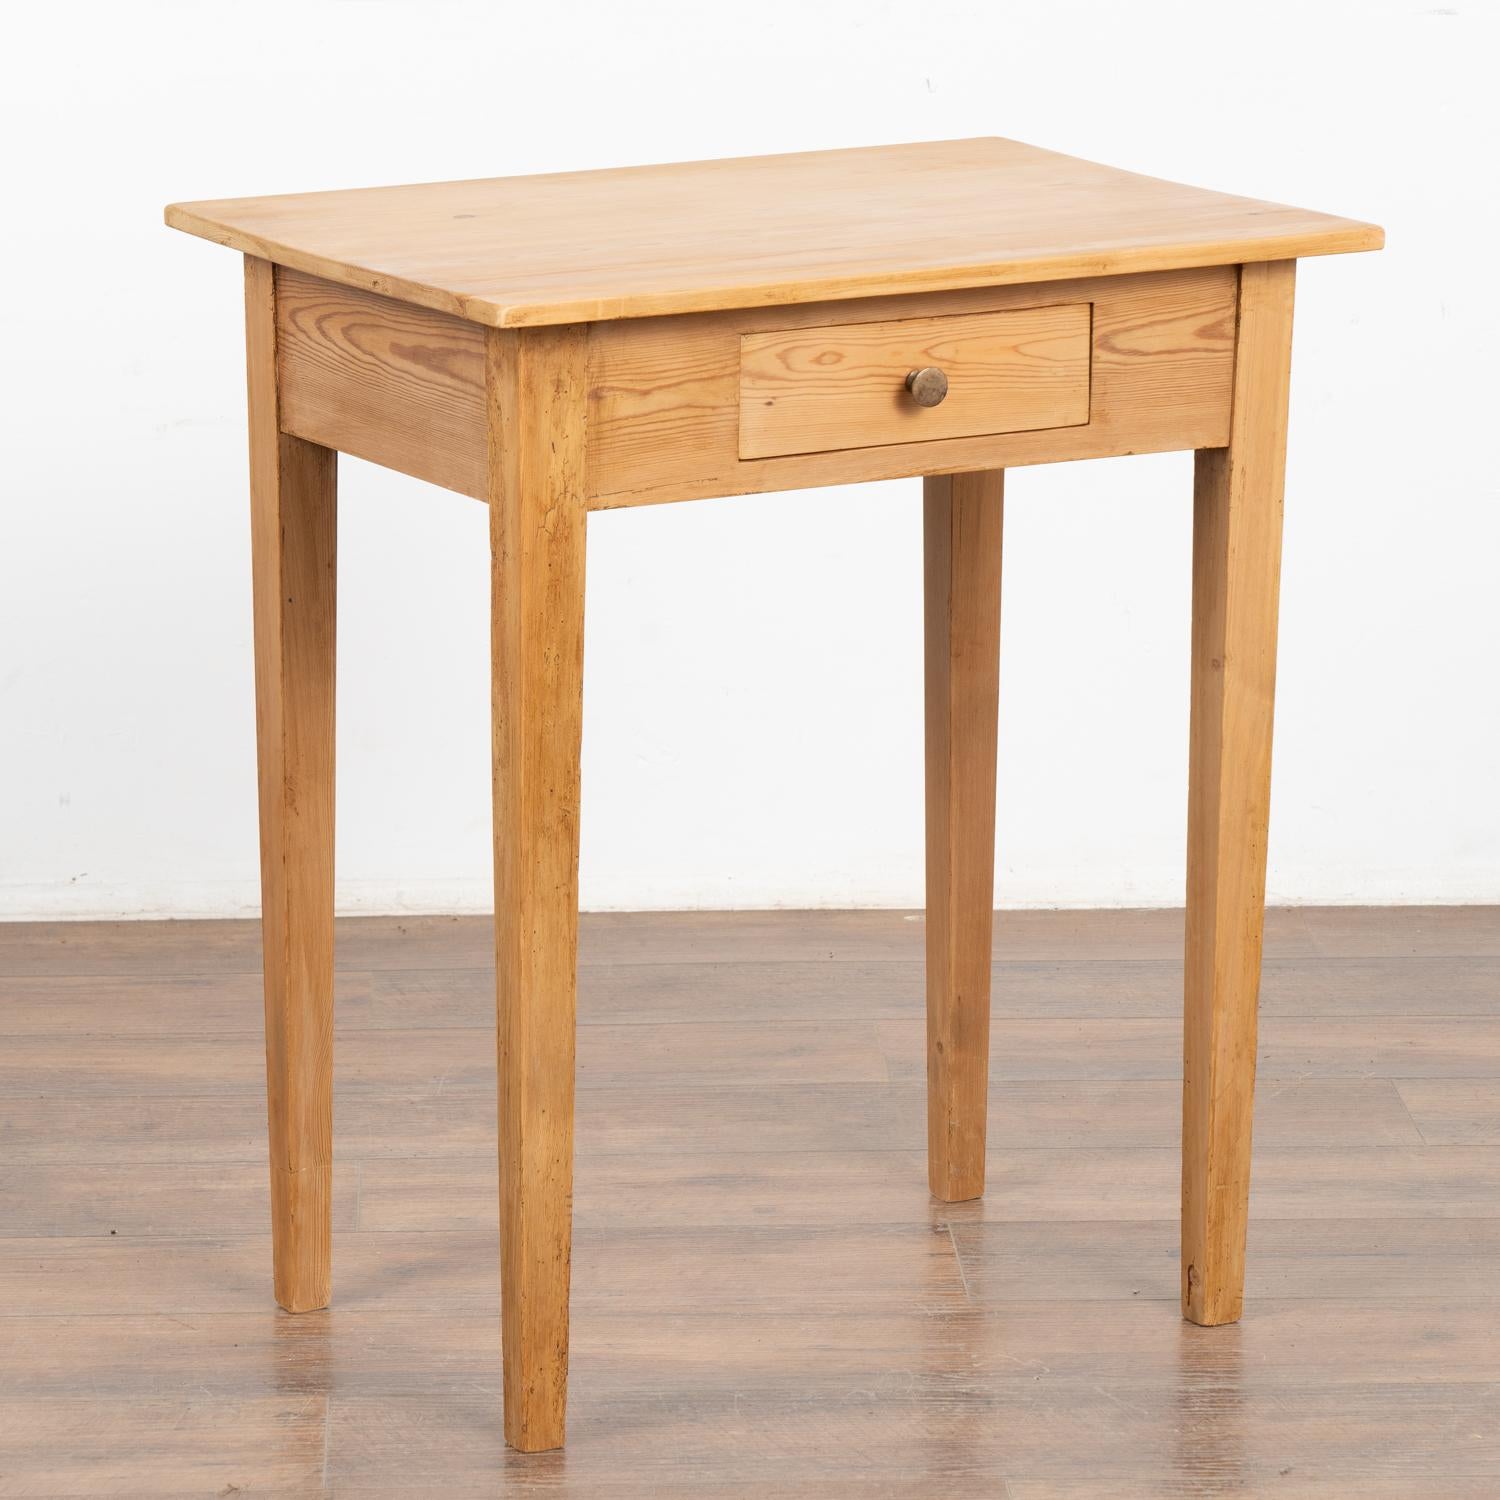 This delightful country pine table with single drawer stands on tapered legs and will make a casual side table or nightstand. 
This table has been restored, the drawer function with brass pull and it is ready to be used and enjoyed.
All scratches,